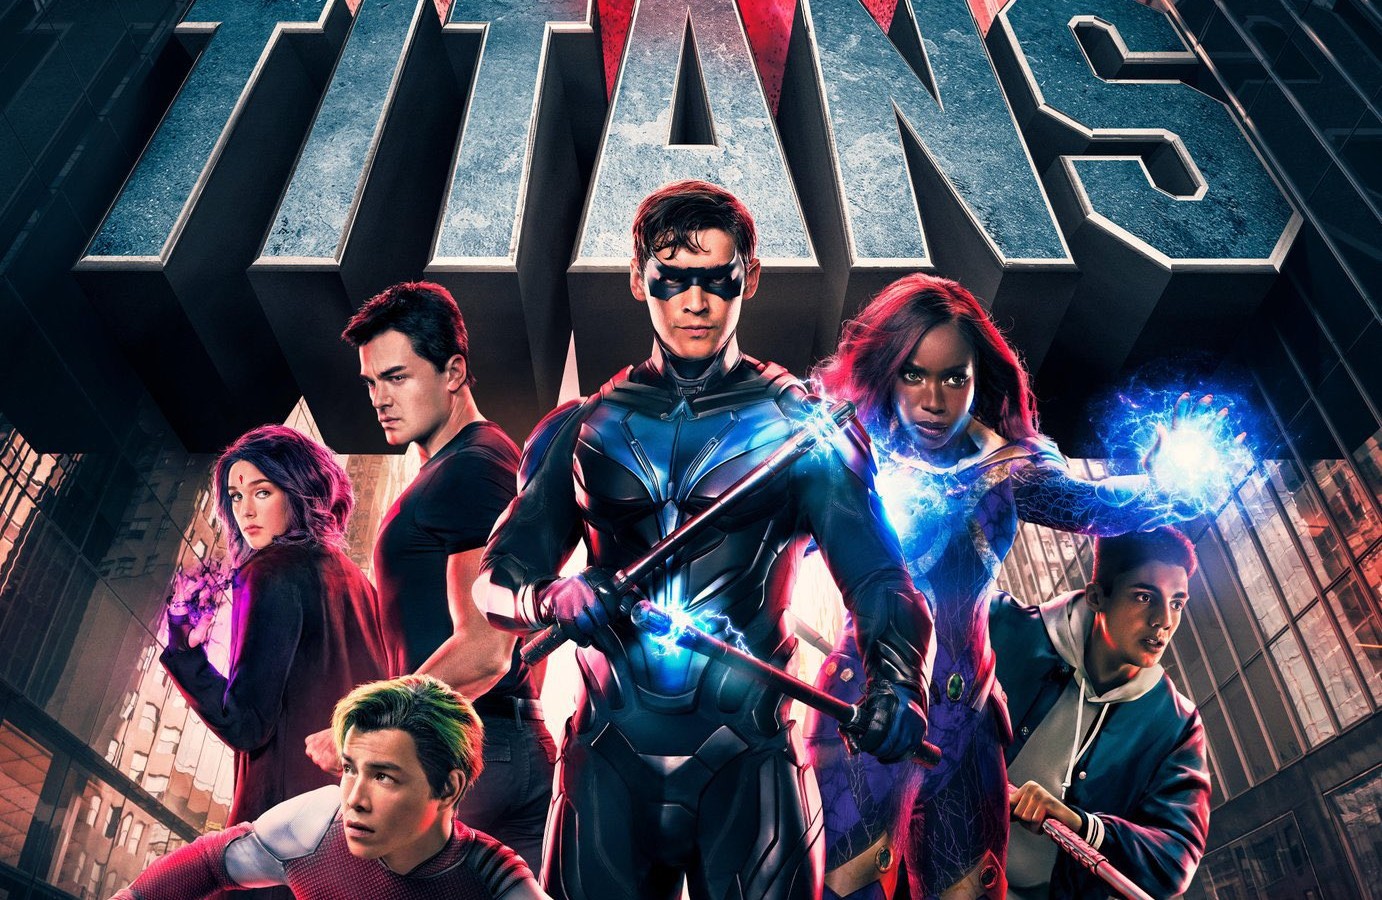 Meet the villains the Titans will face in Season 4 on HBO Max